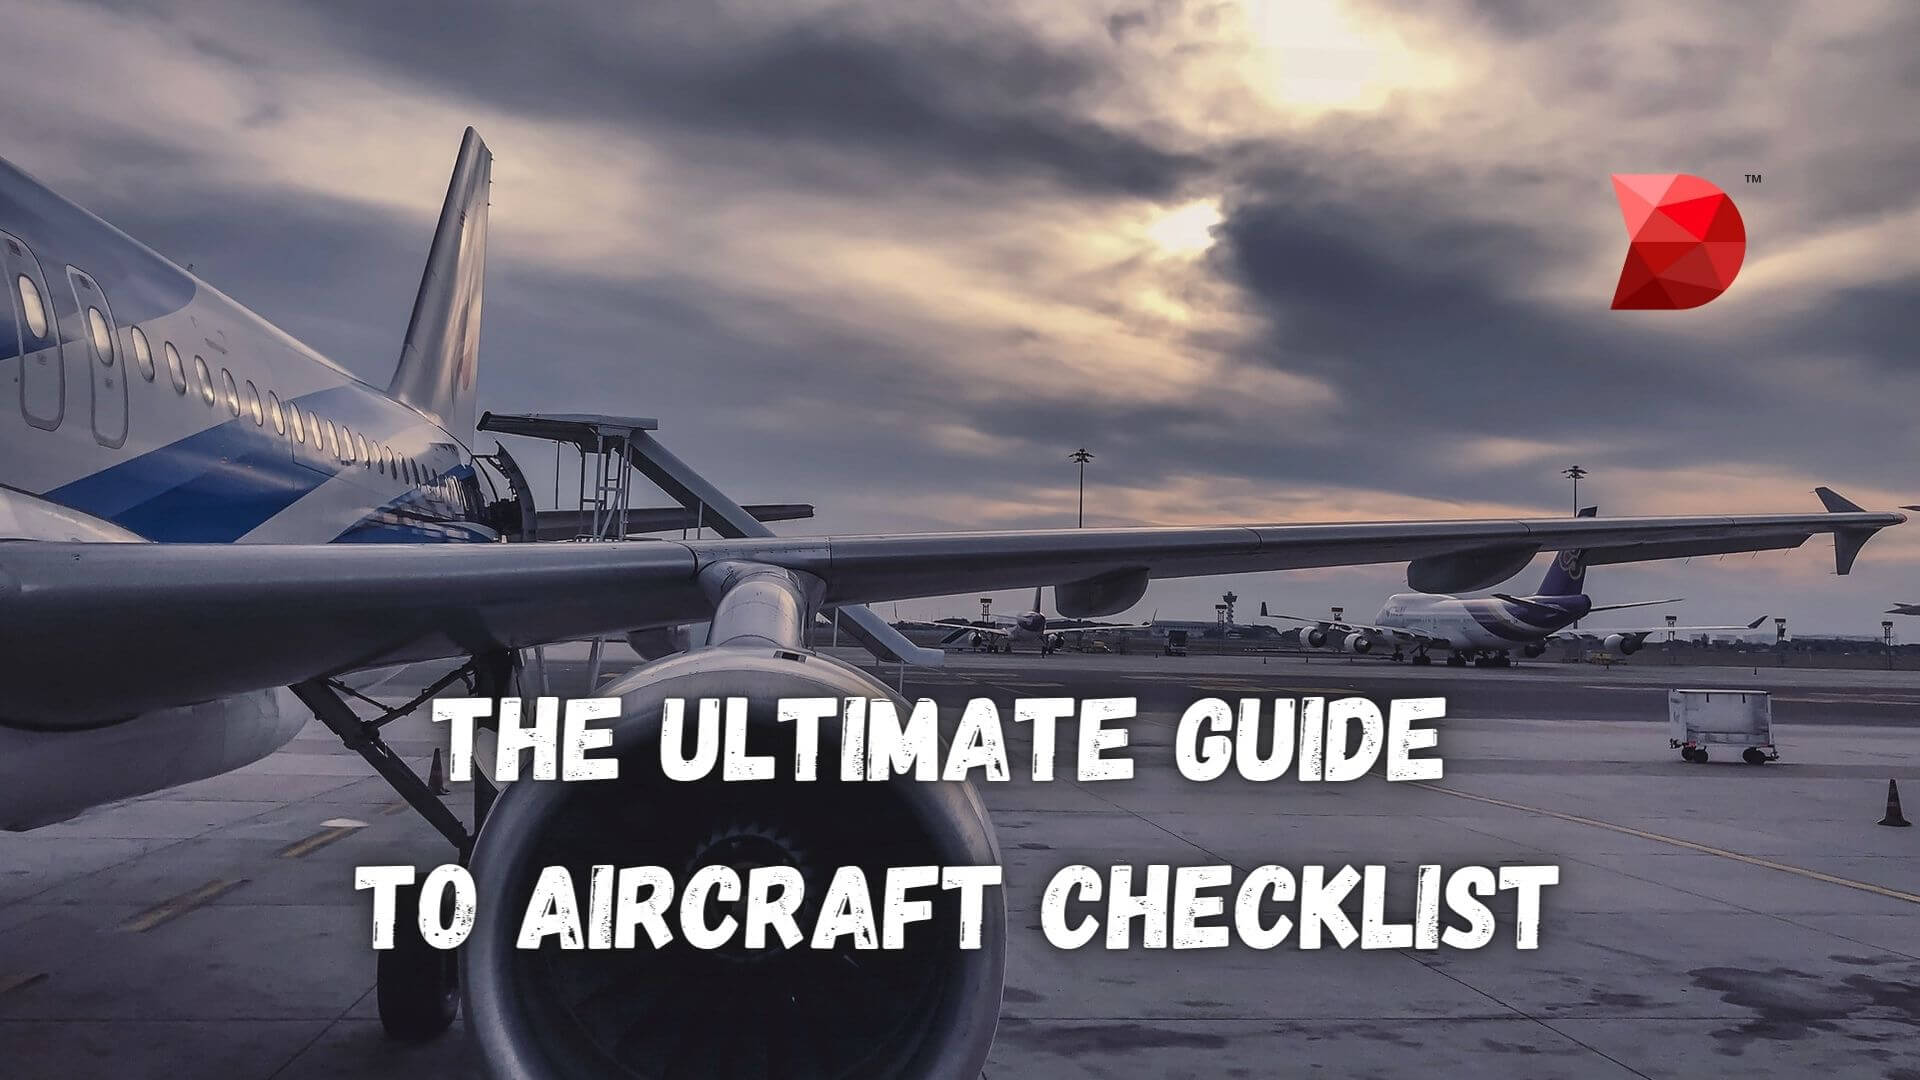 The Ultimate Guide to Aircraft Checklist